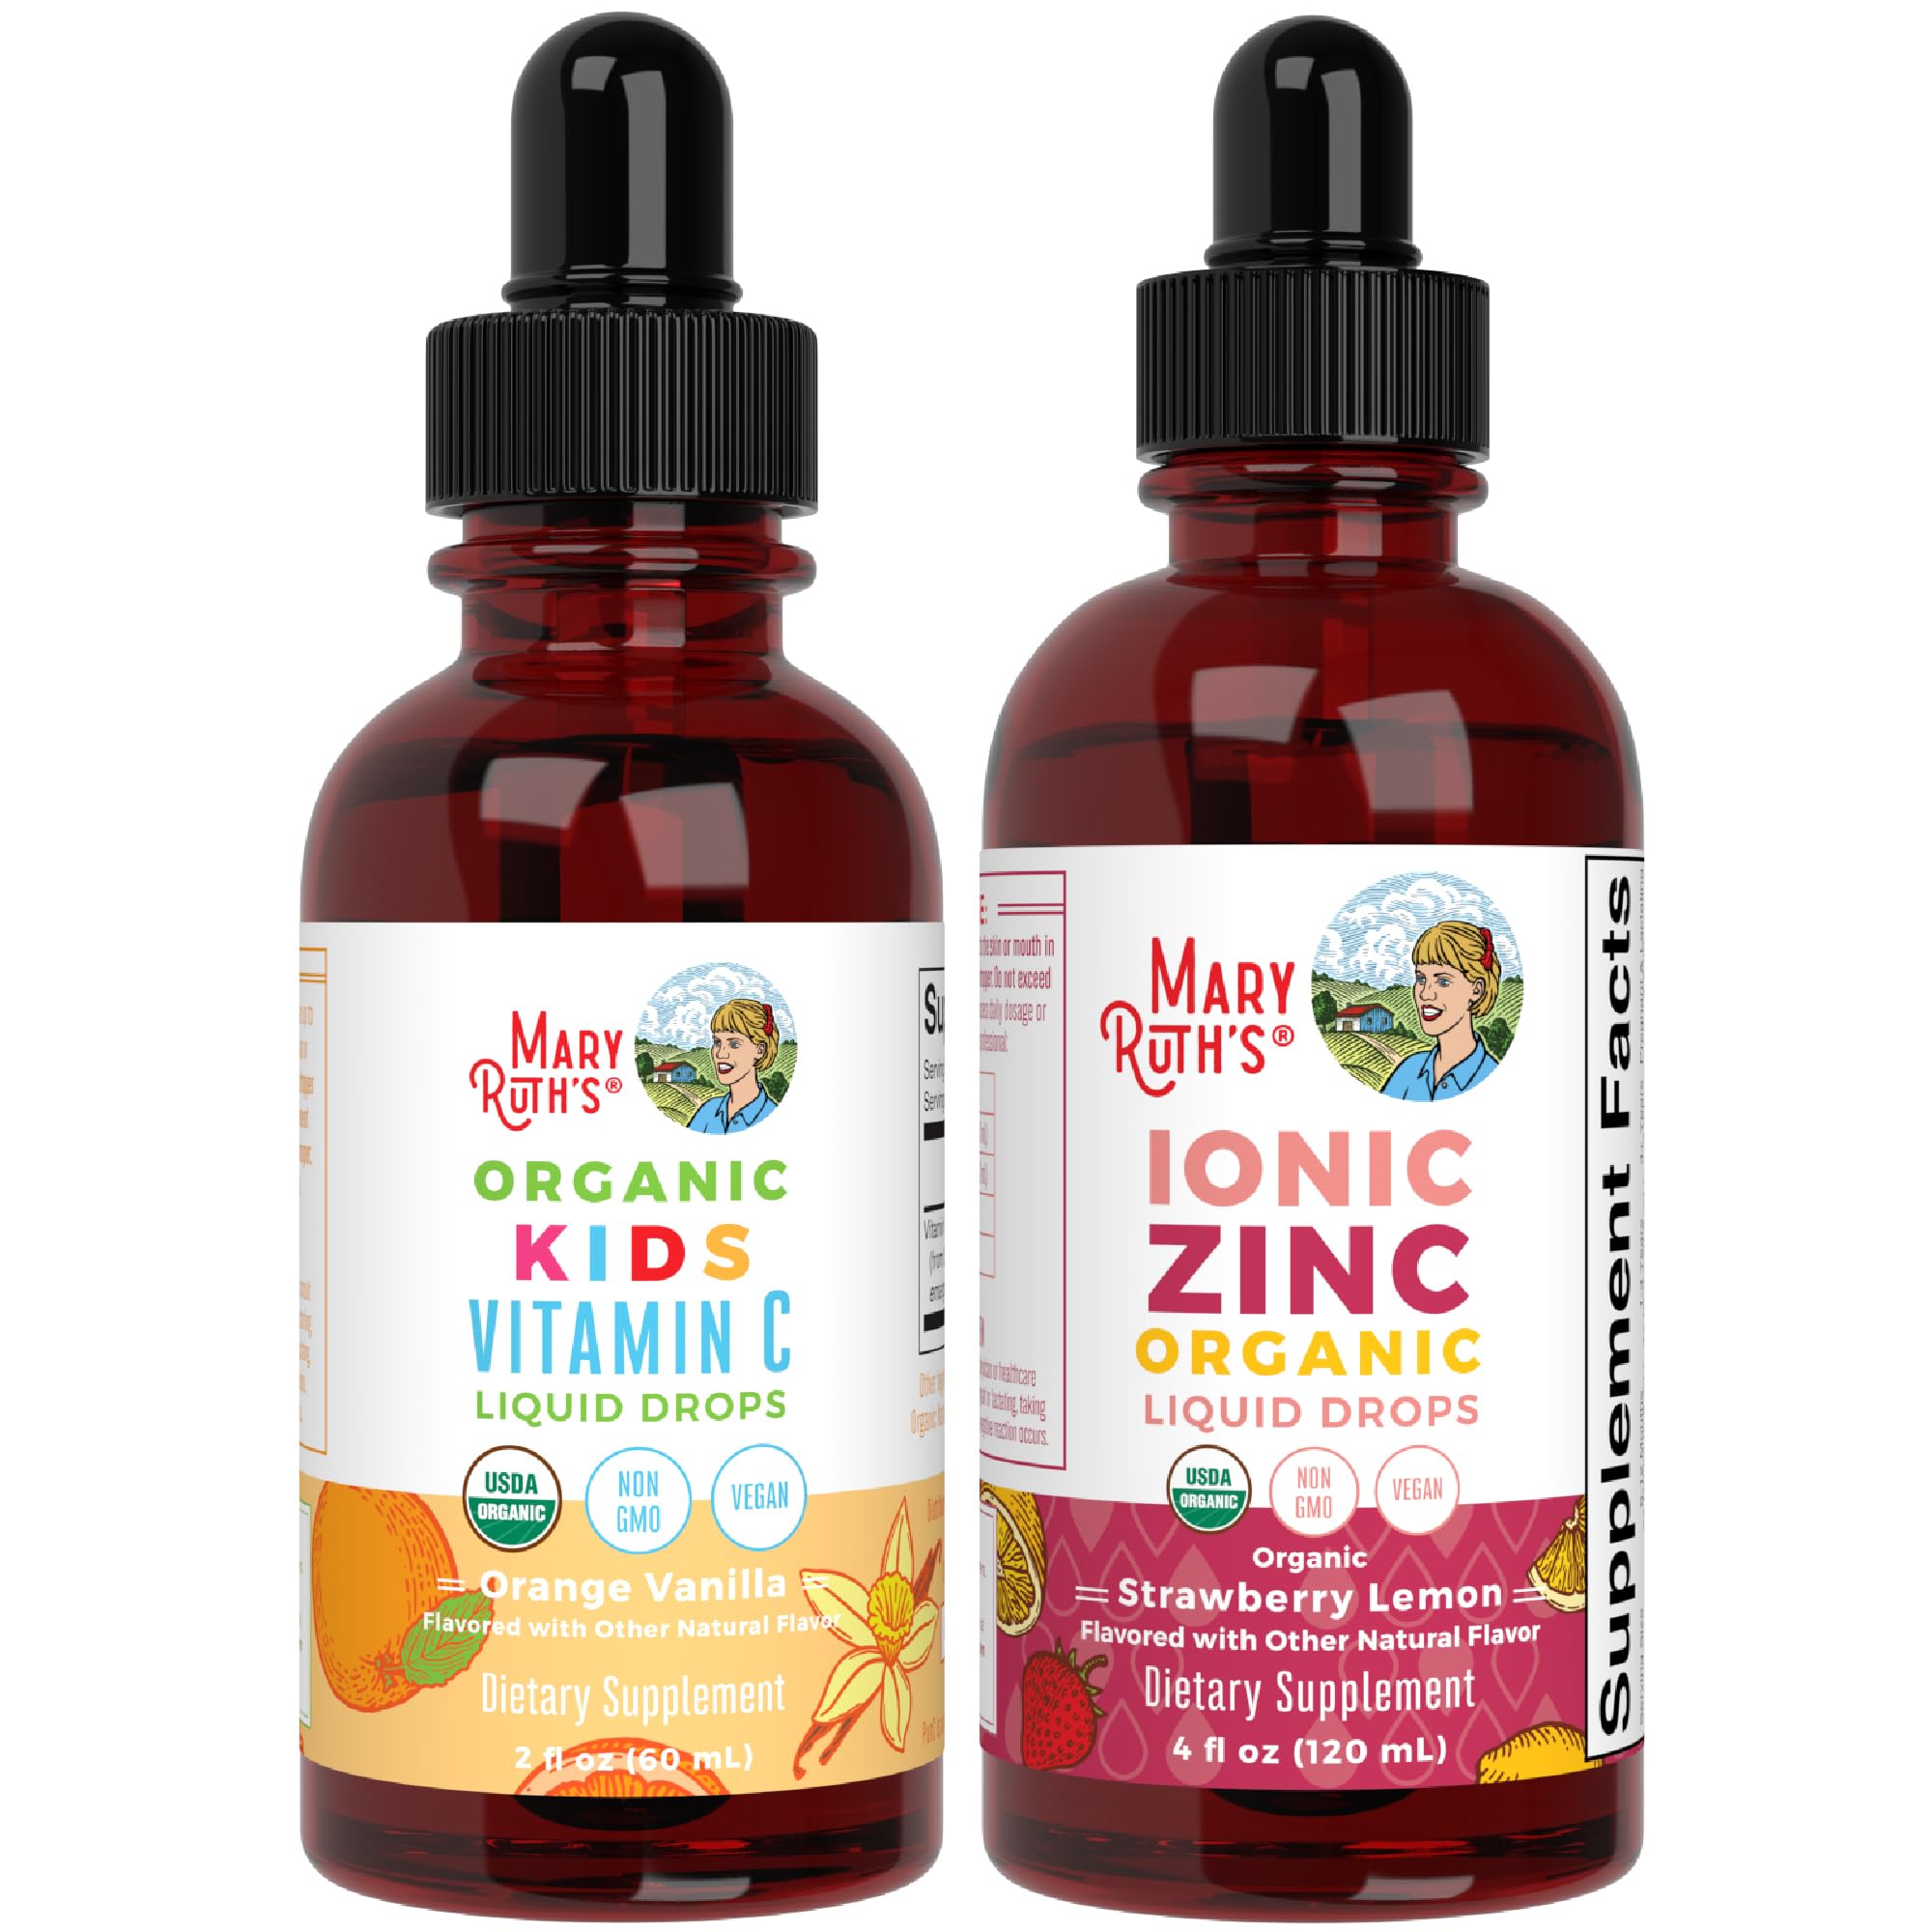 MaryRuth's USDA Organic Kids Vitamin C Liquid Drops and Zinc Liquid Supplement for Adults & Kids in Strawberry Lemon, 2-Pack Bundle for Immune Support, Skin Health, and Overall Health, Vegan & Non-GMO